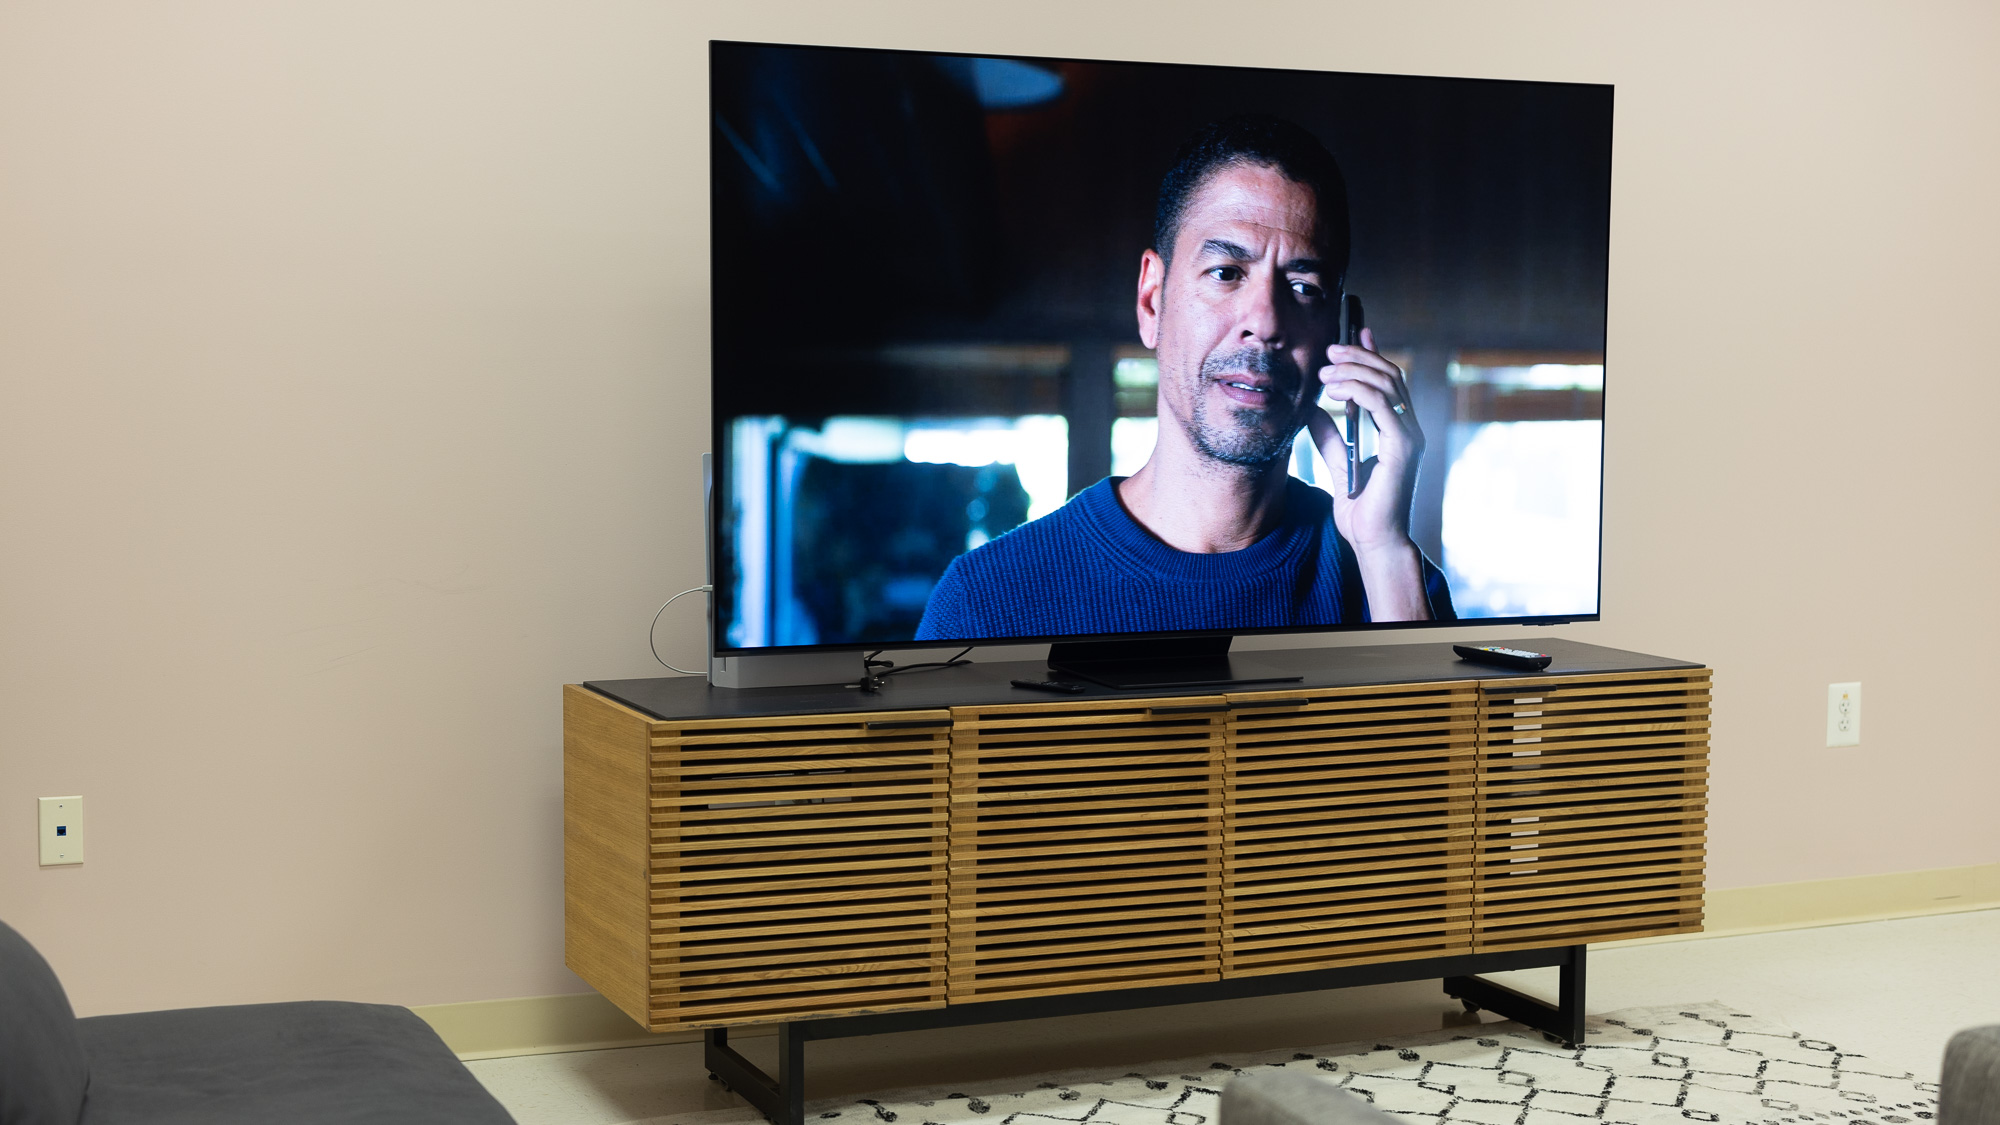 4K TV Guide 2022: The Best 4K TV Providers and Channels